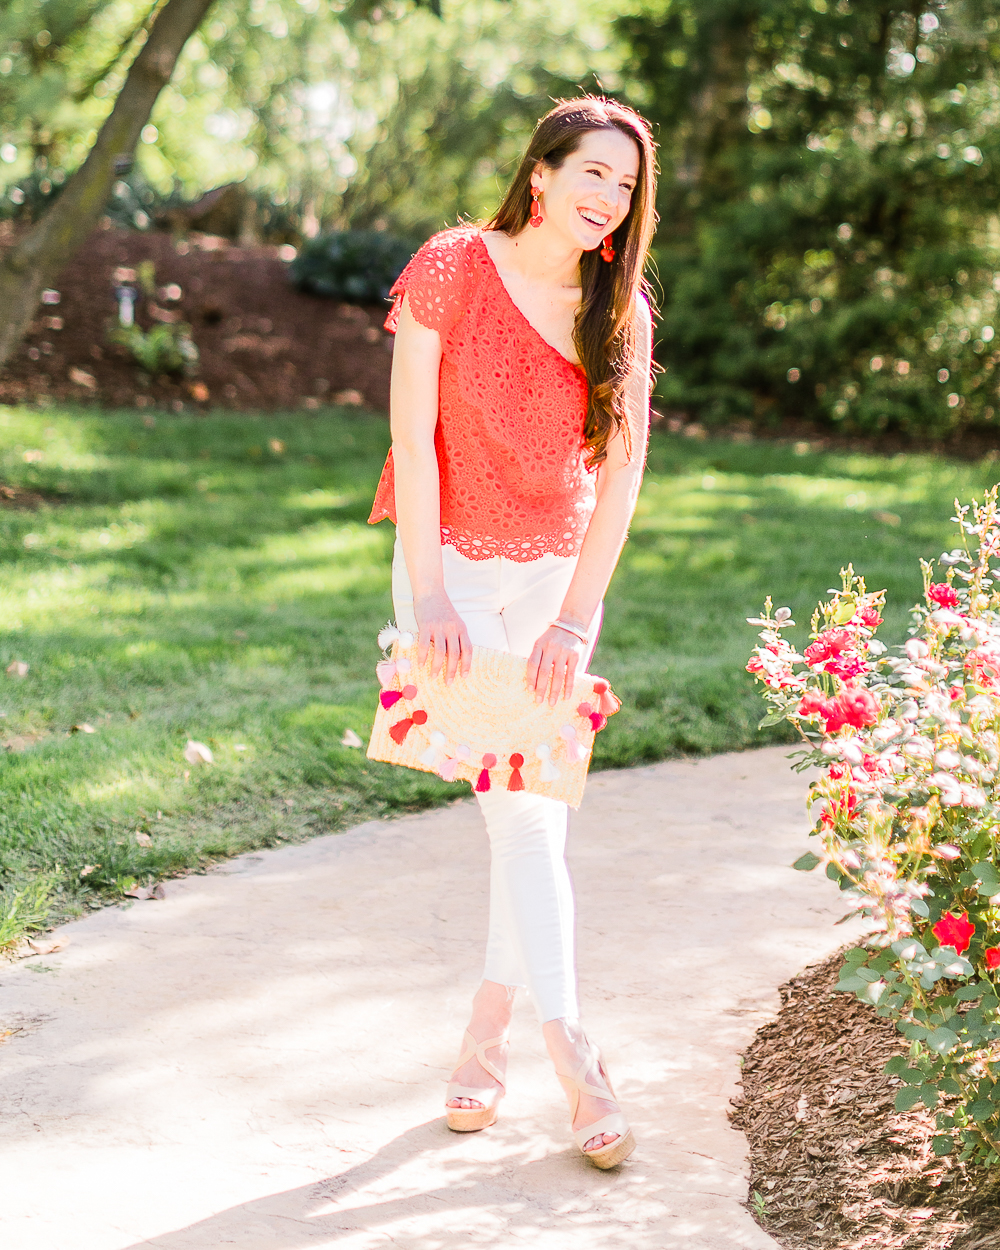 What to wear over Memorial Day Weekend by southern fashion blogger Stephanie Ziajka from Diary of a Debutante, Memorial Day outfit idea, BB Dakota Lolita top styled with white Levi's ankle skinny jeans, Madden nude wedges, Amazon straw tassel clutch, Amazon red beaded earrings, and Kendra Scott Aubrey mixed metals bangle bracelet set